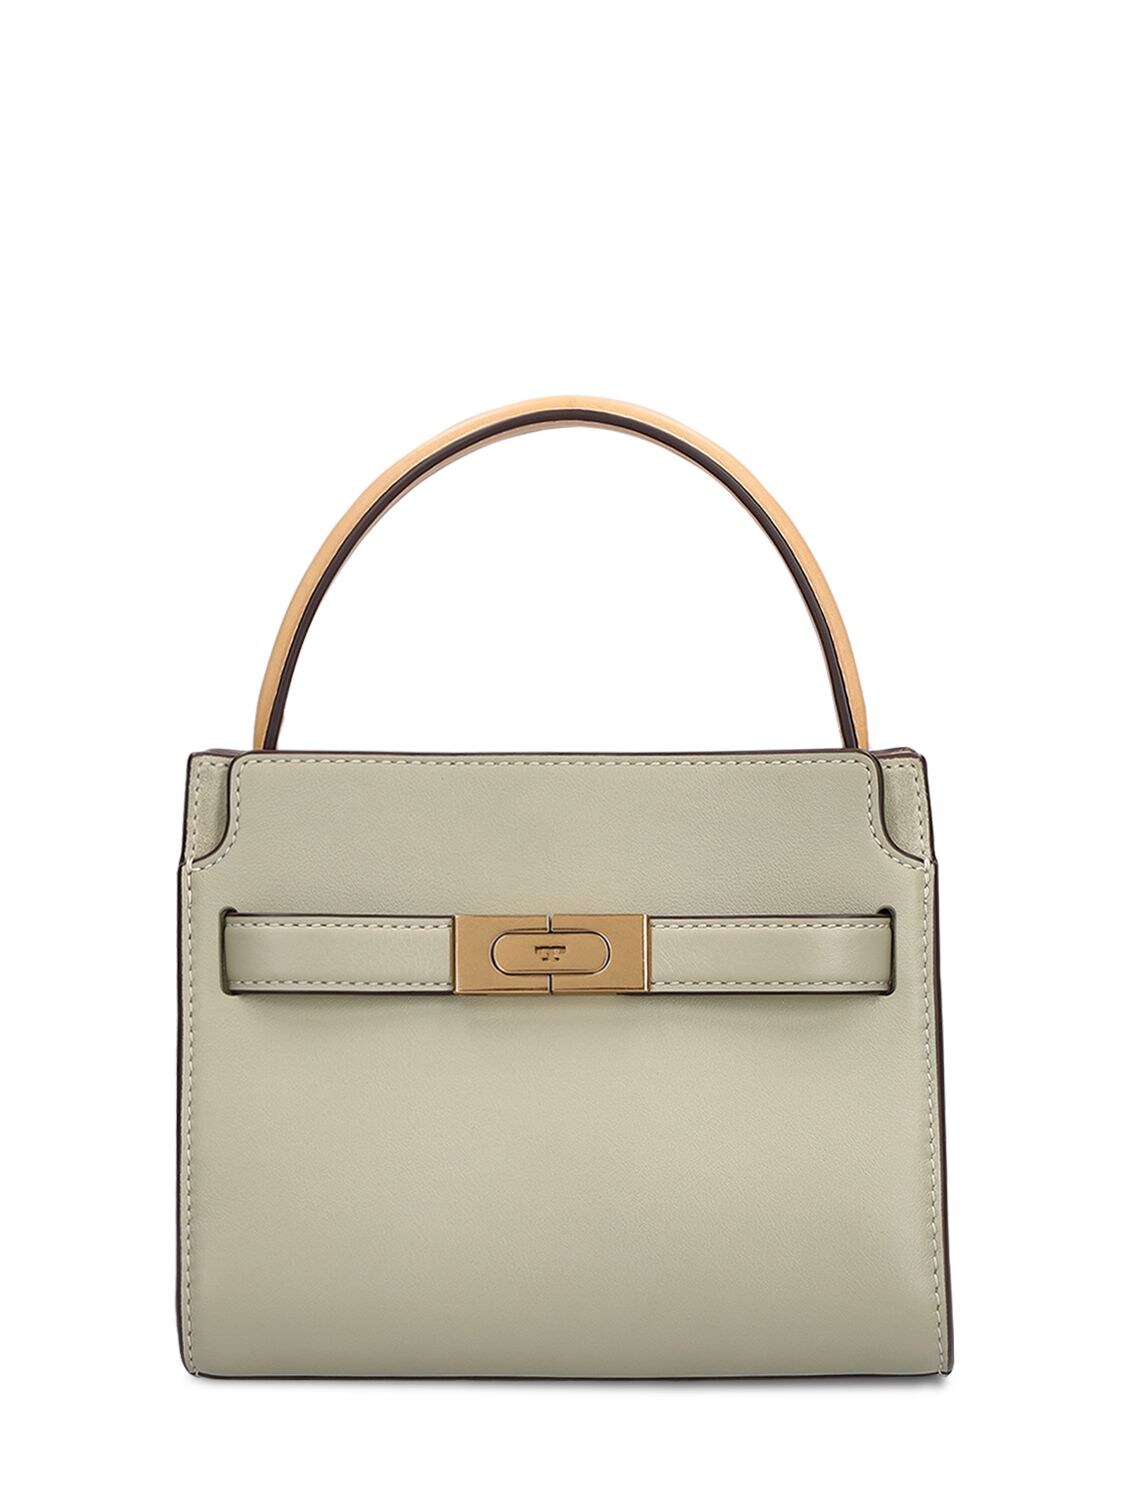 Tory Burch Petite Lee Radziwill Leather Bag In Pine Frost | ModeSens